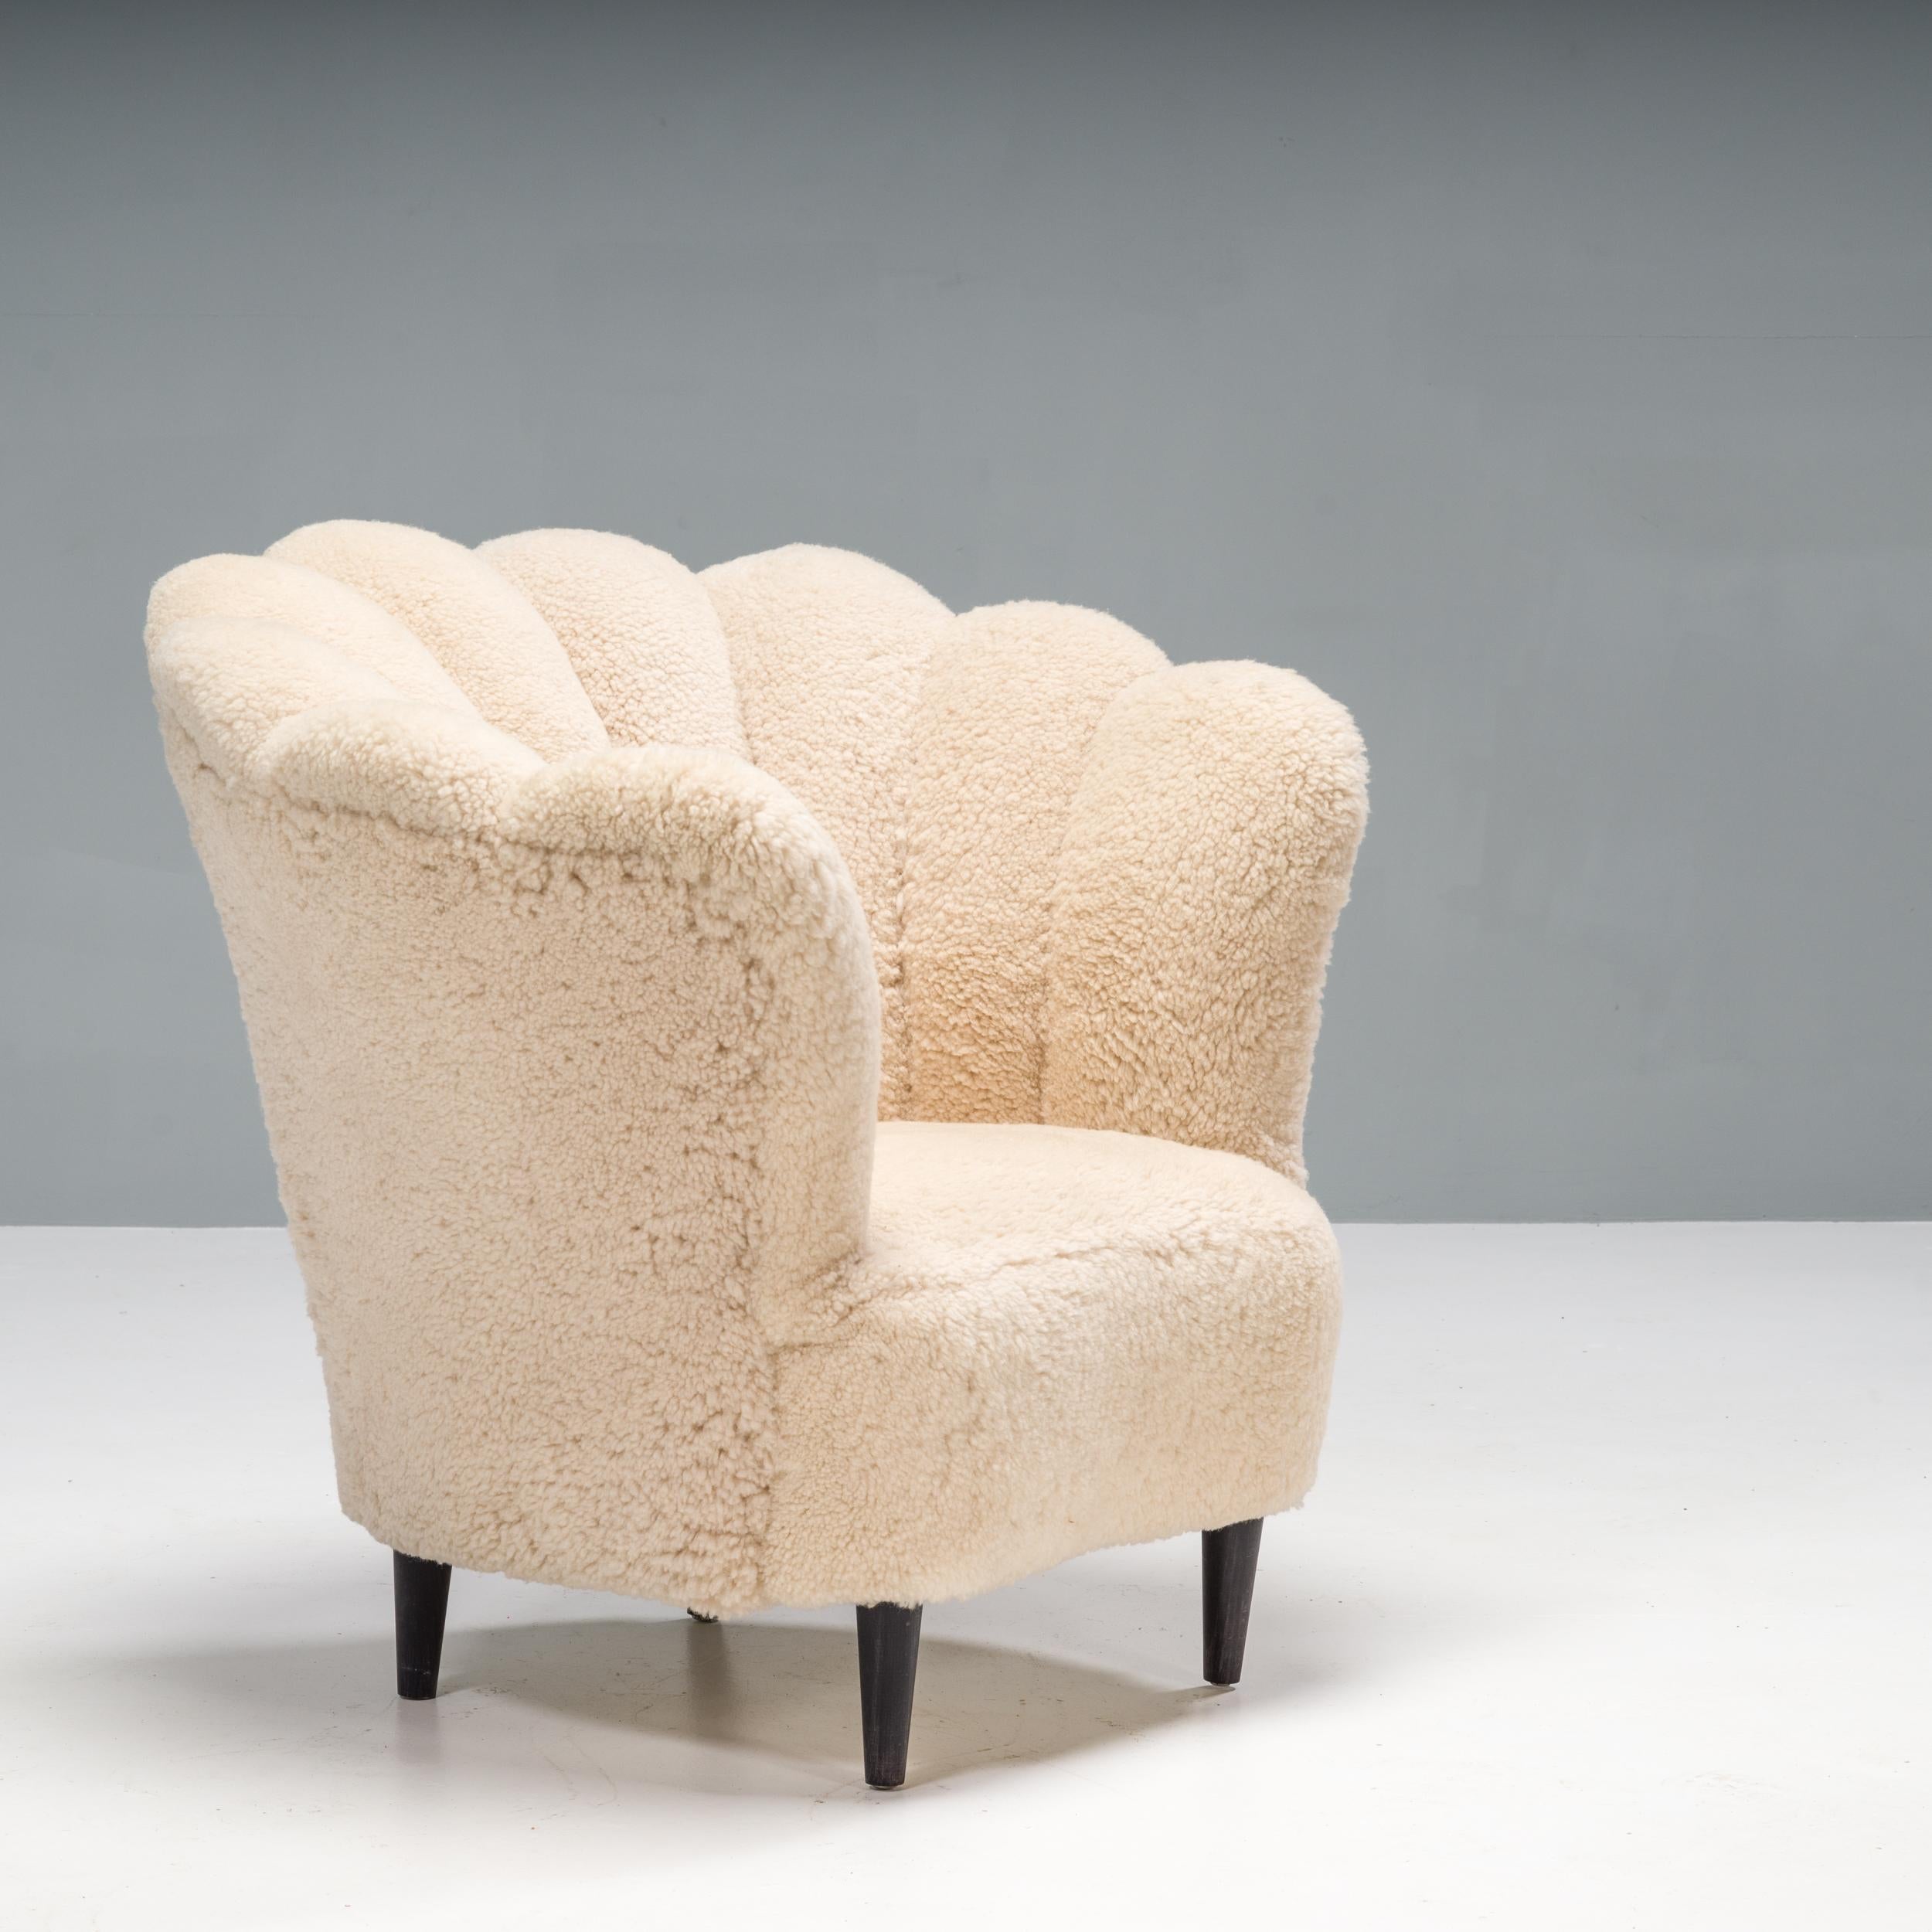 A beautiful vintage tub Danish Art Deco armchair in the manner of architect Flemming Lassen. This armchair features a scalloped backrest, which curves around the sides of the chair, enveloping and comfortable.

Fully recently upholstered in